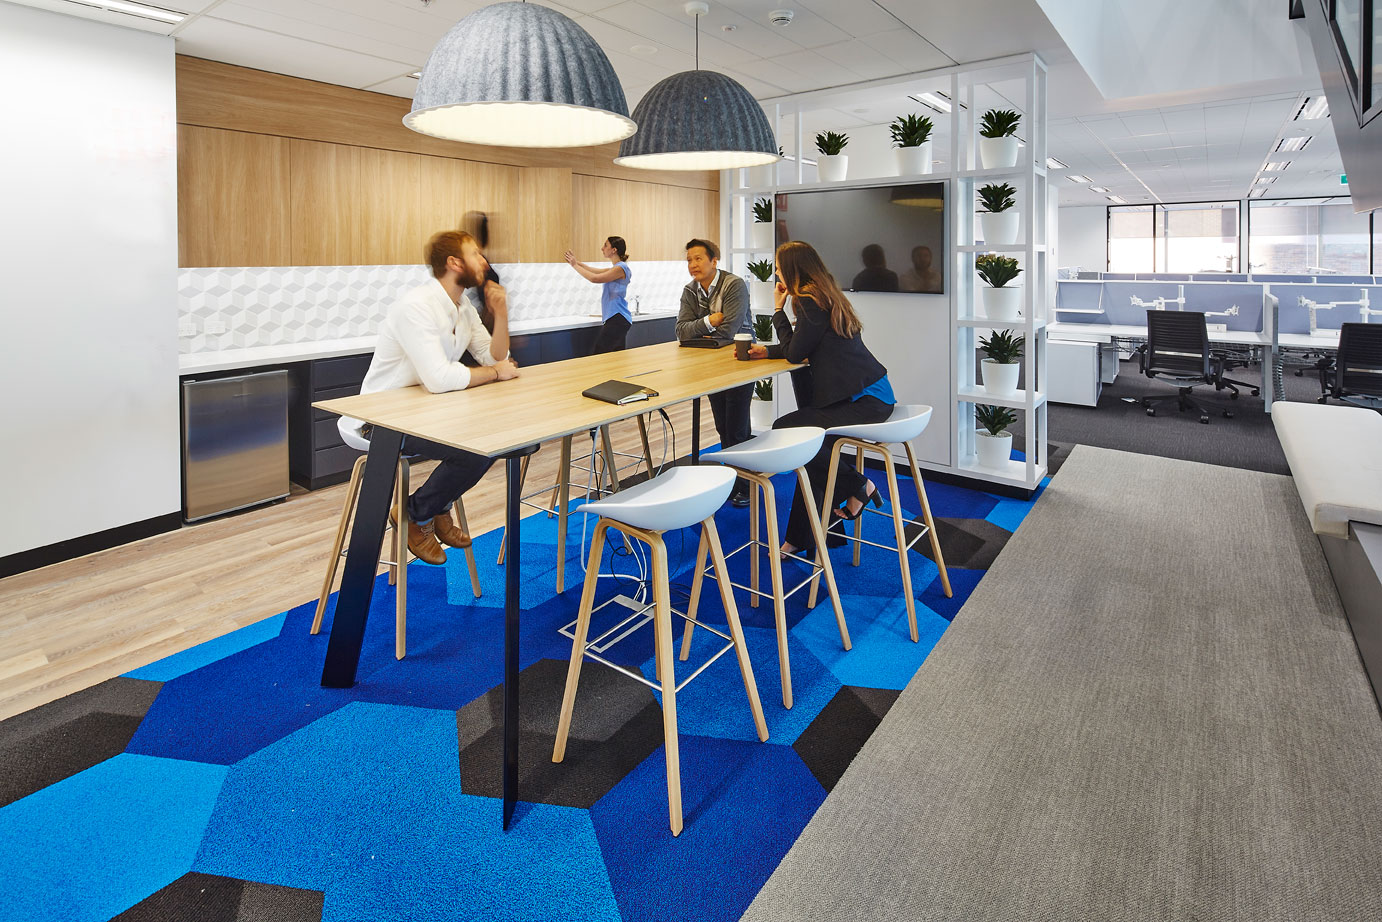 5 Disruptive Office Design Trends for the Modern Workplace